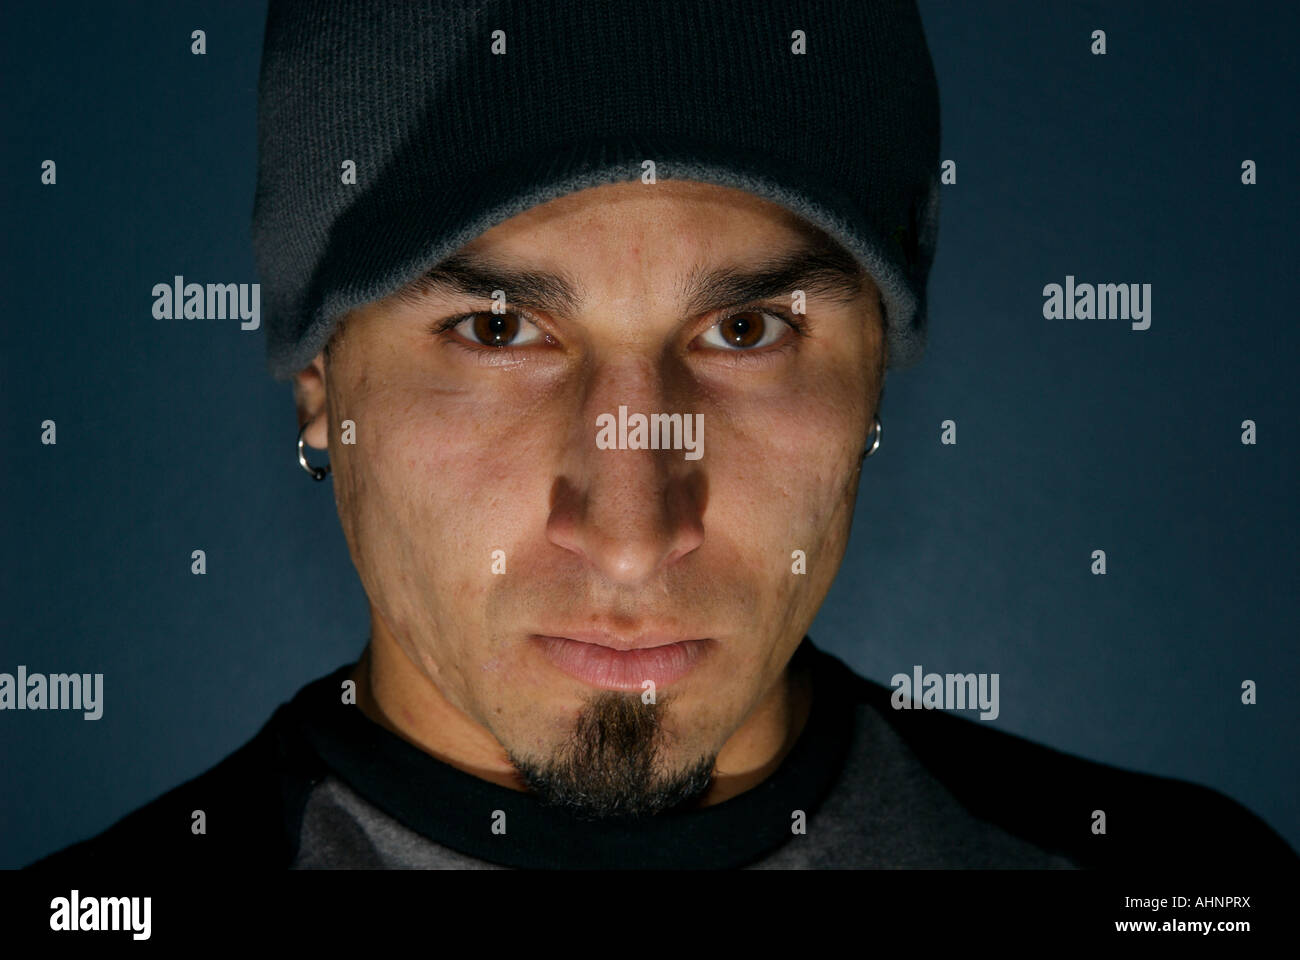 A glaring Hispanic man with brown eyes and a goatee wearing earings and a beanie Stock Photo